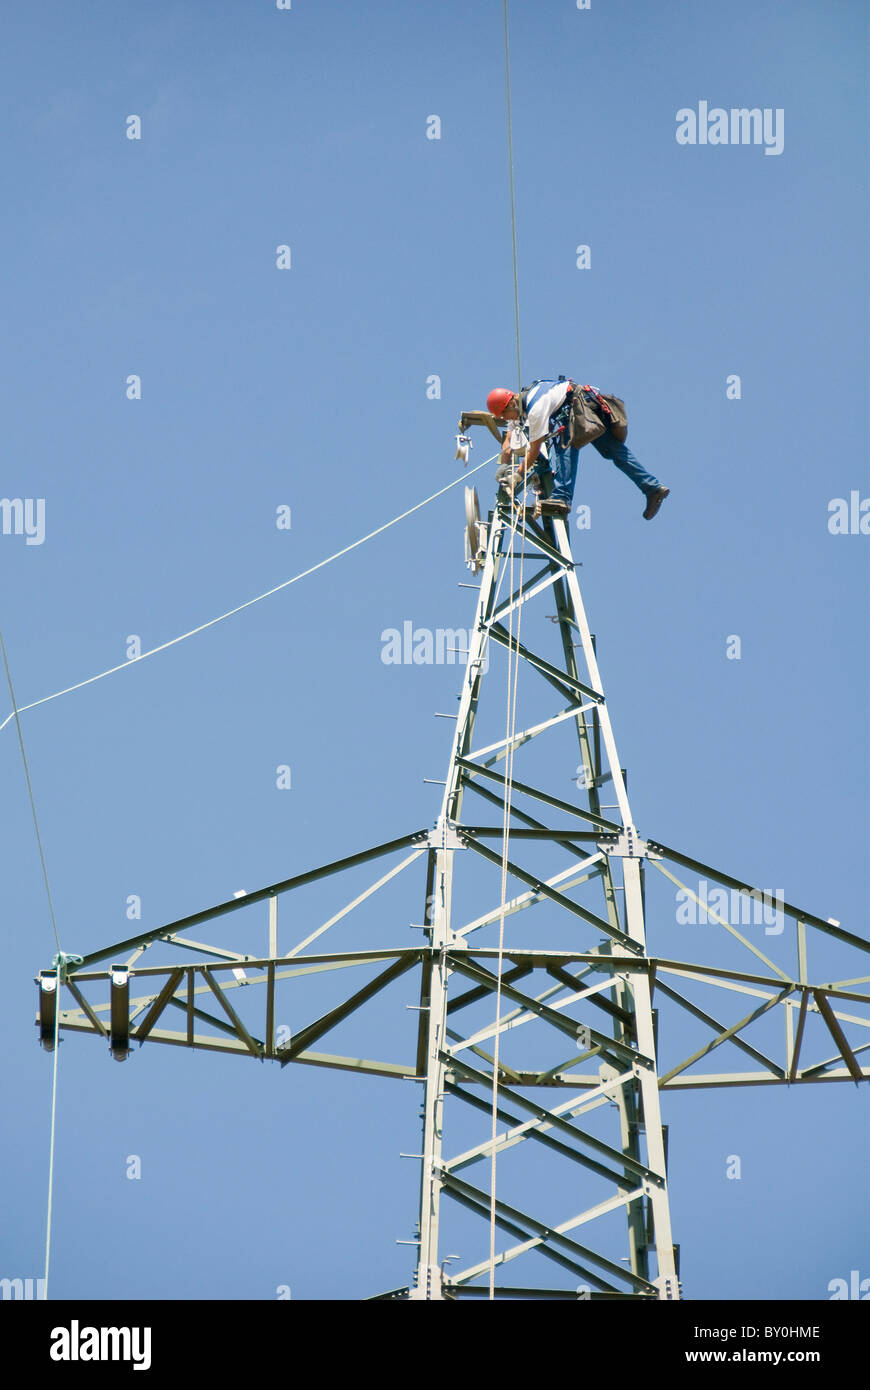 Worker on an electricity pylon attaching the cable, Austria, Europe Stock Photo